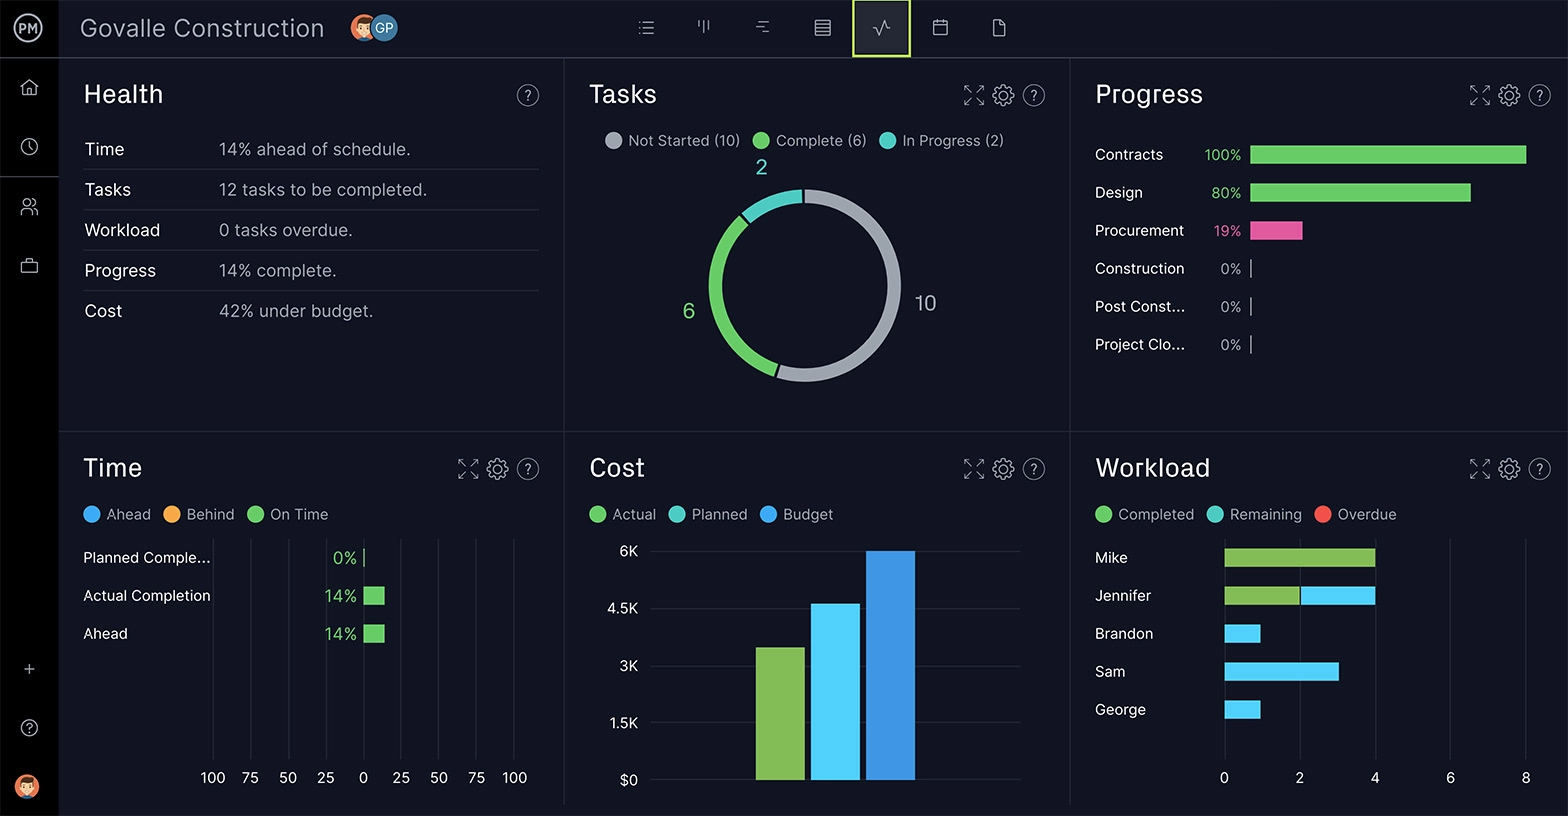 ProjectManager's dashboard